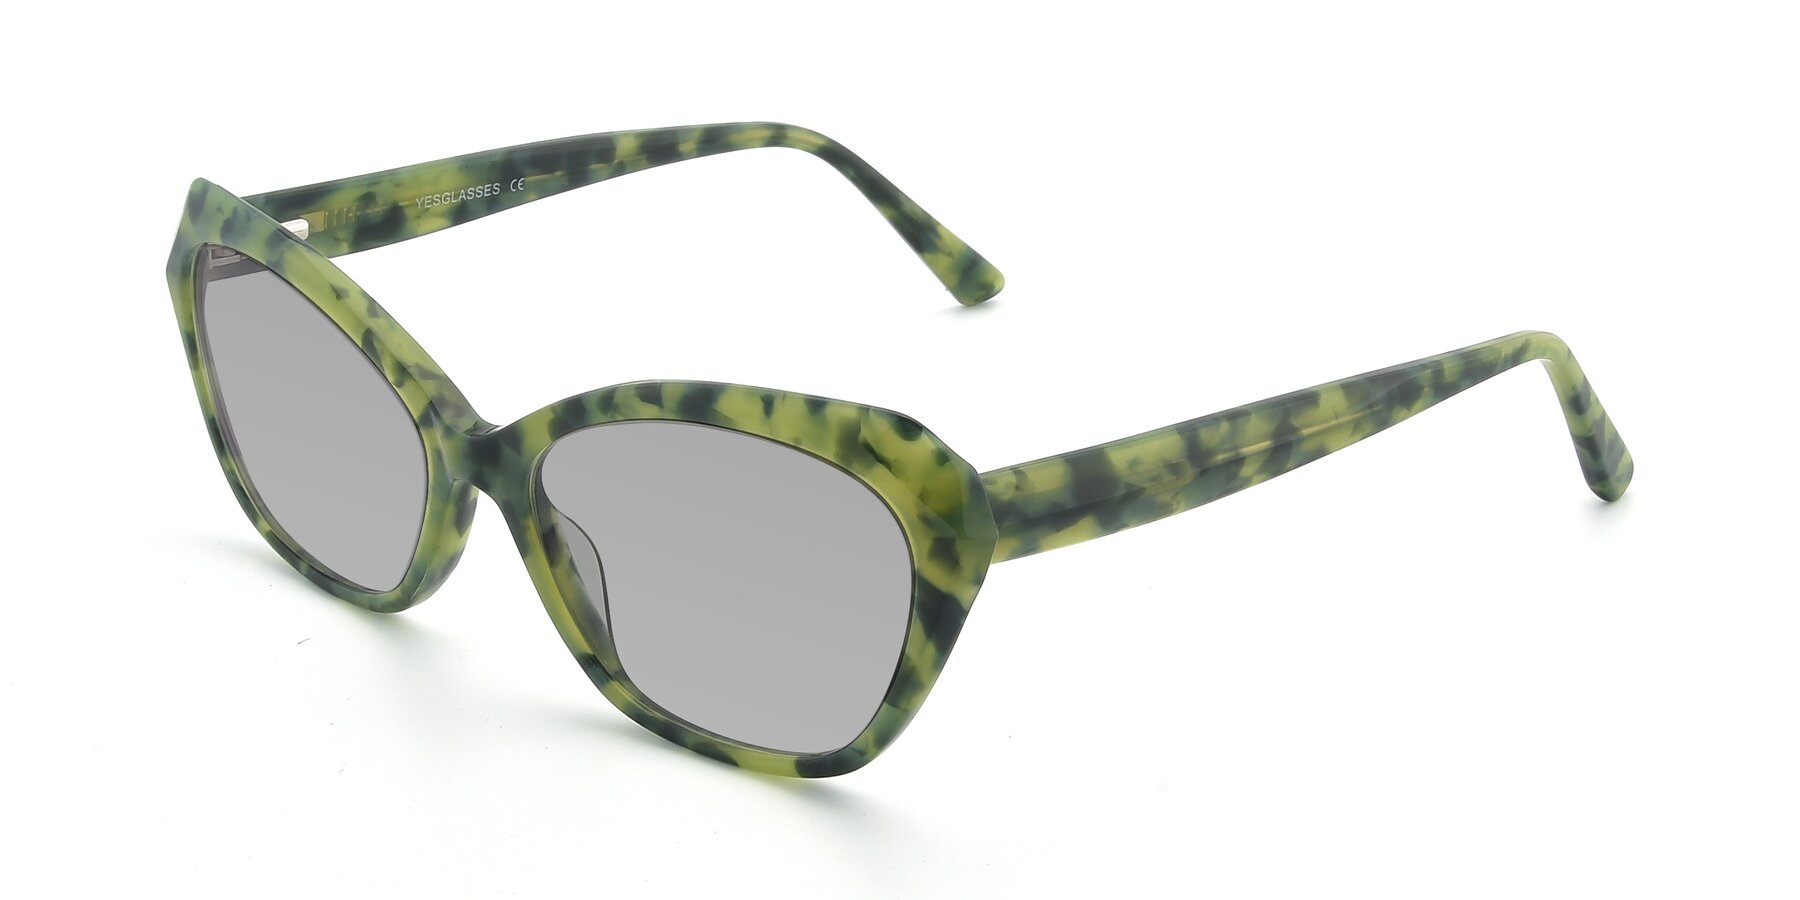 Angle of 17351 in Floral Green with Light Gray Tinted Lenses